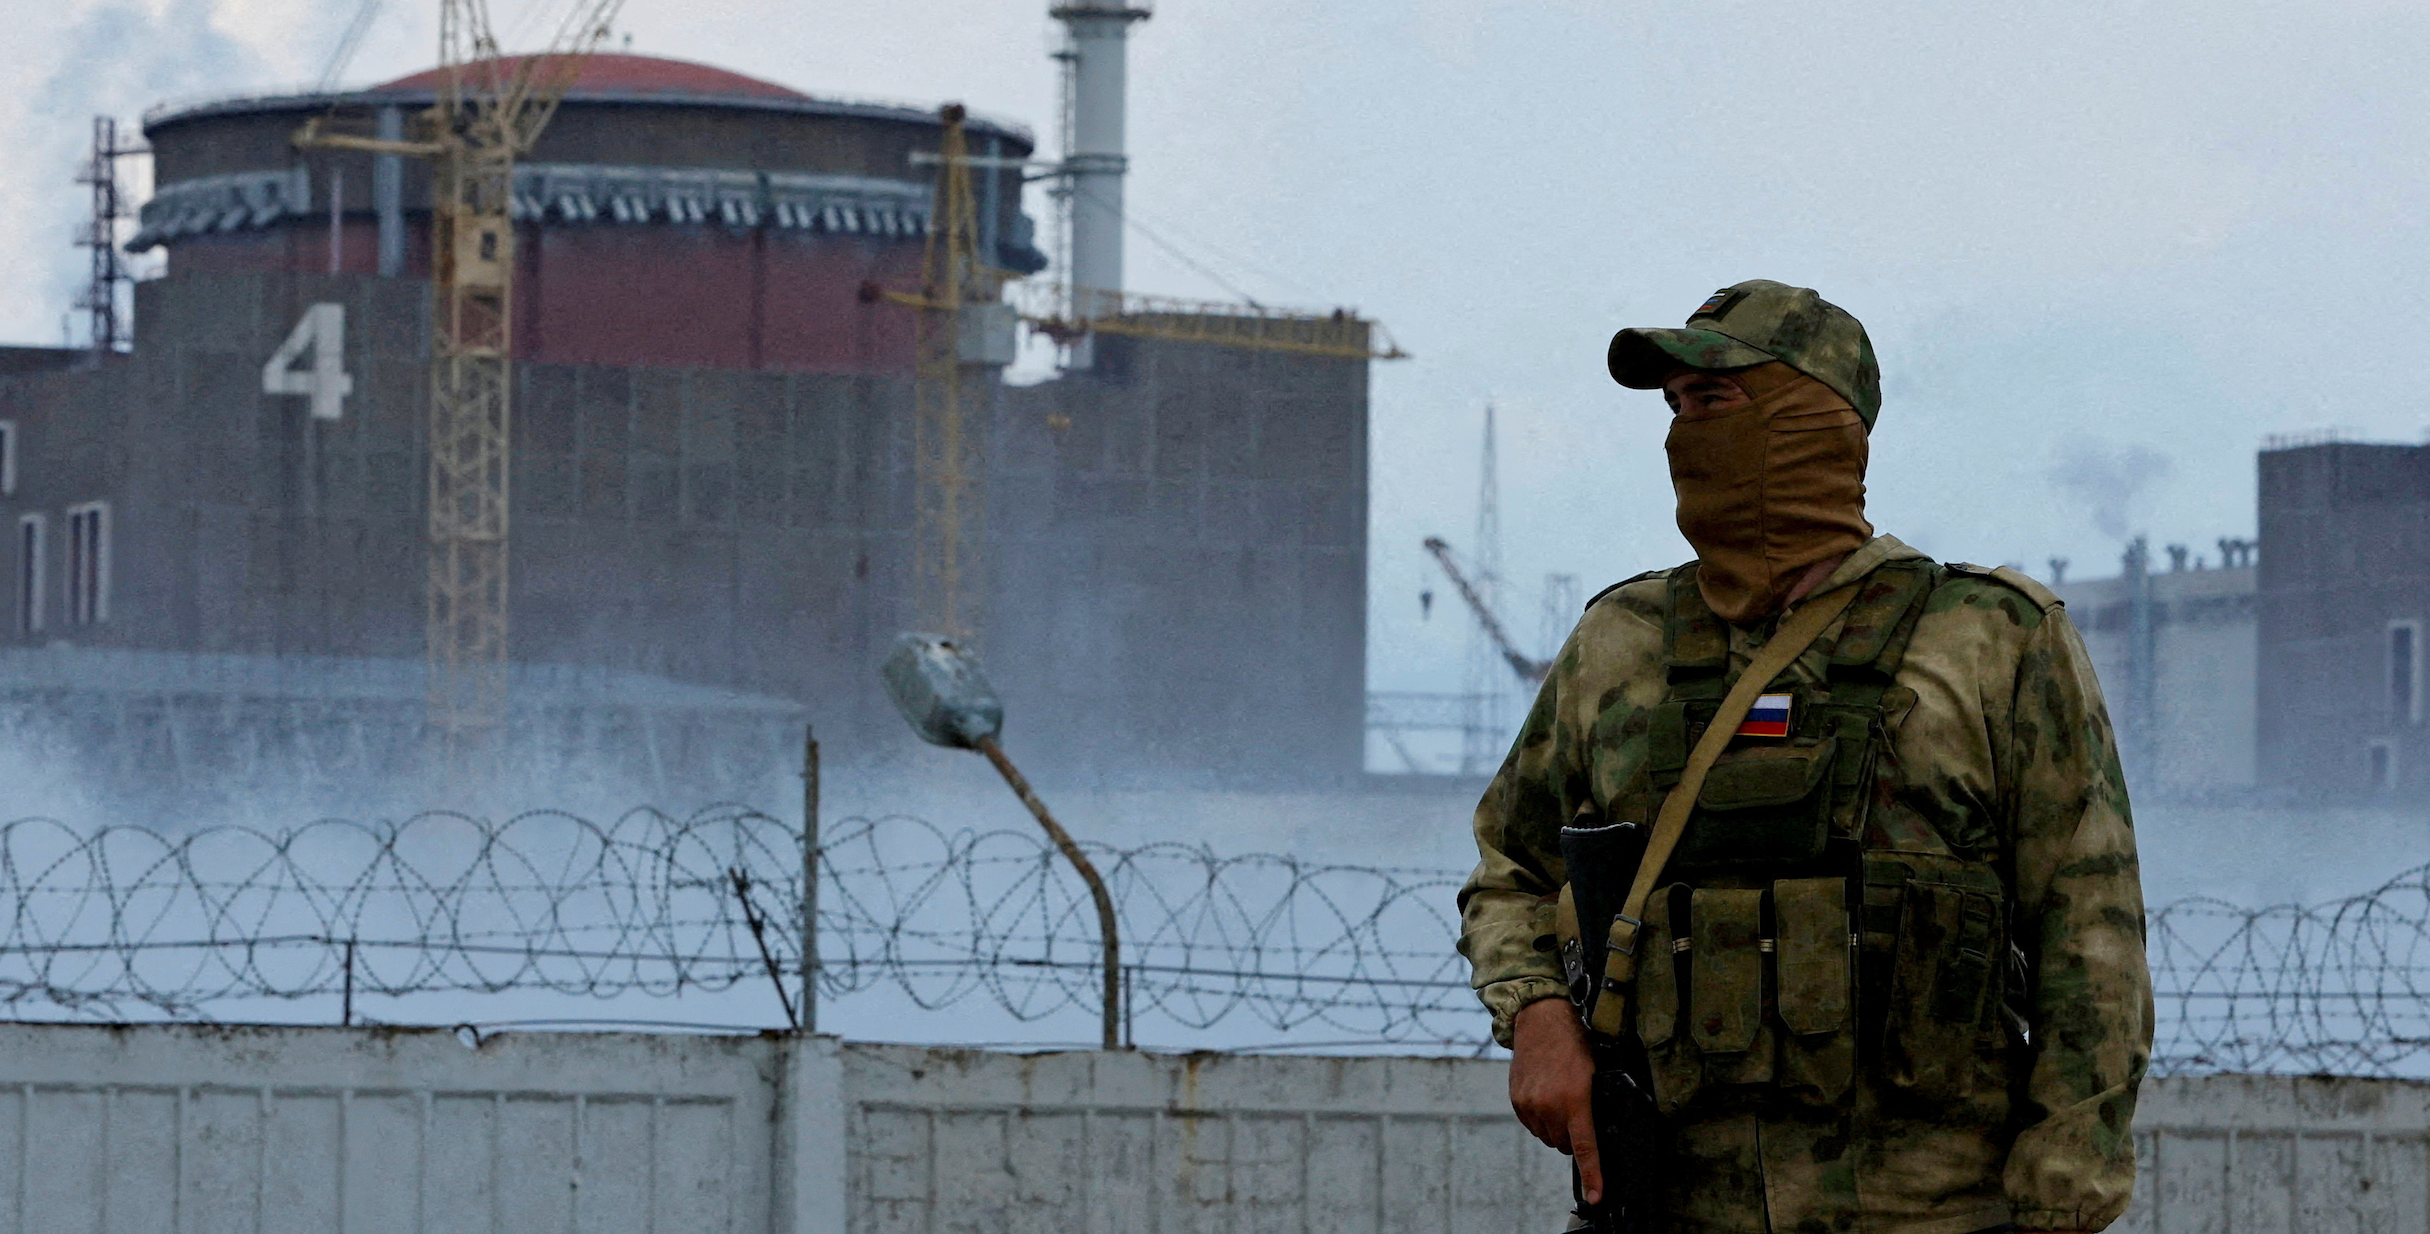  A serviceman with a Russian flag on his uniform stands guard near the Zaporizhzhia Nuclear Power Plant